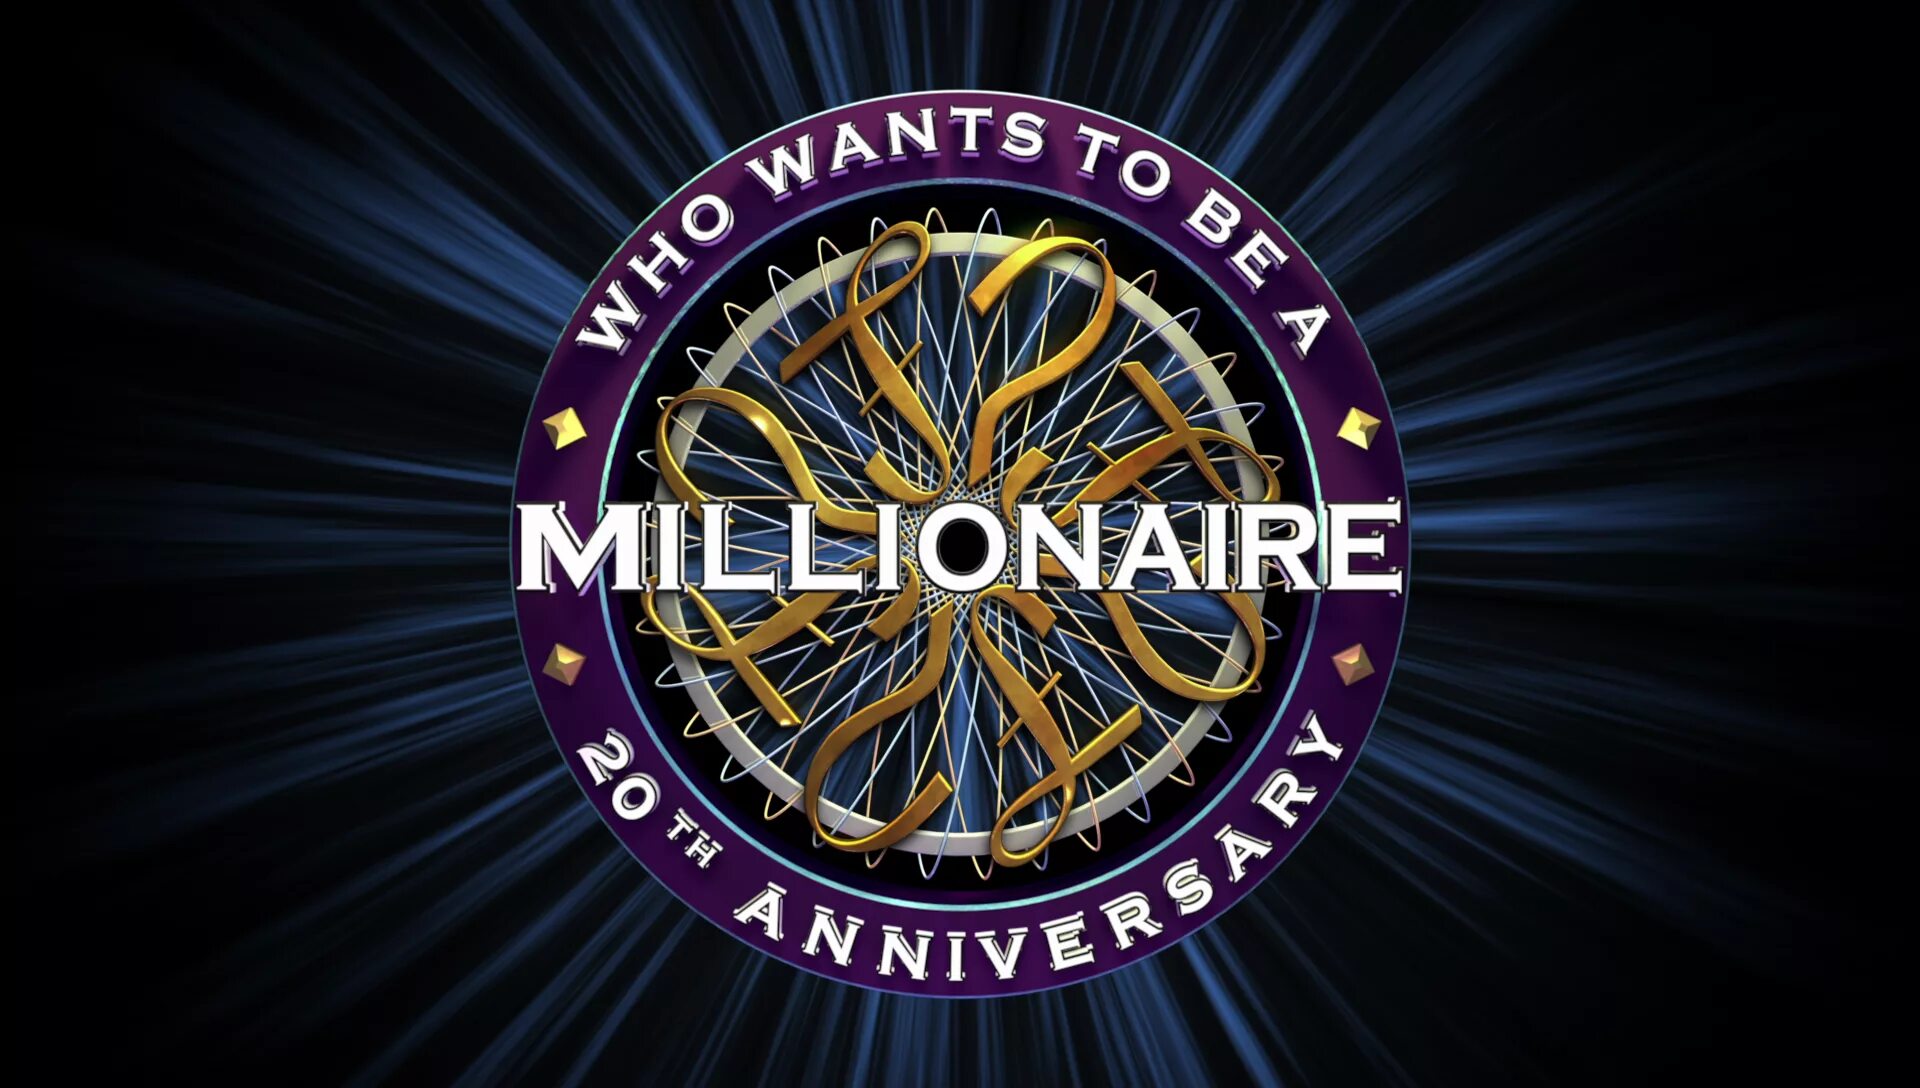 Who wants to be the to my. Who wants to be a Millionaire? (Великобритания) телепередача. Who wants to be a Millionaire.